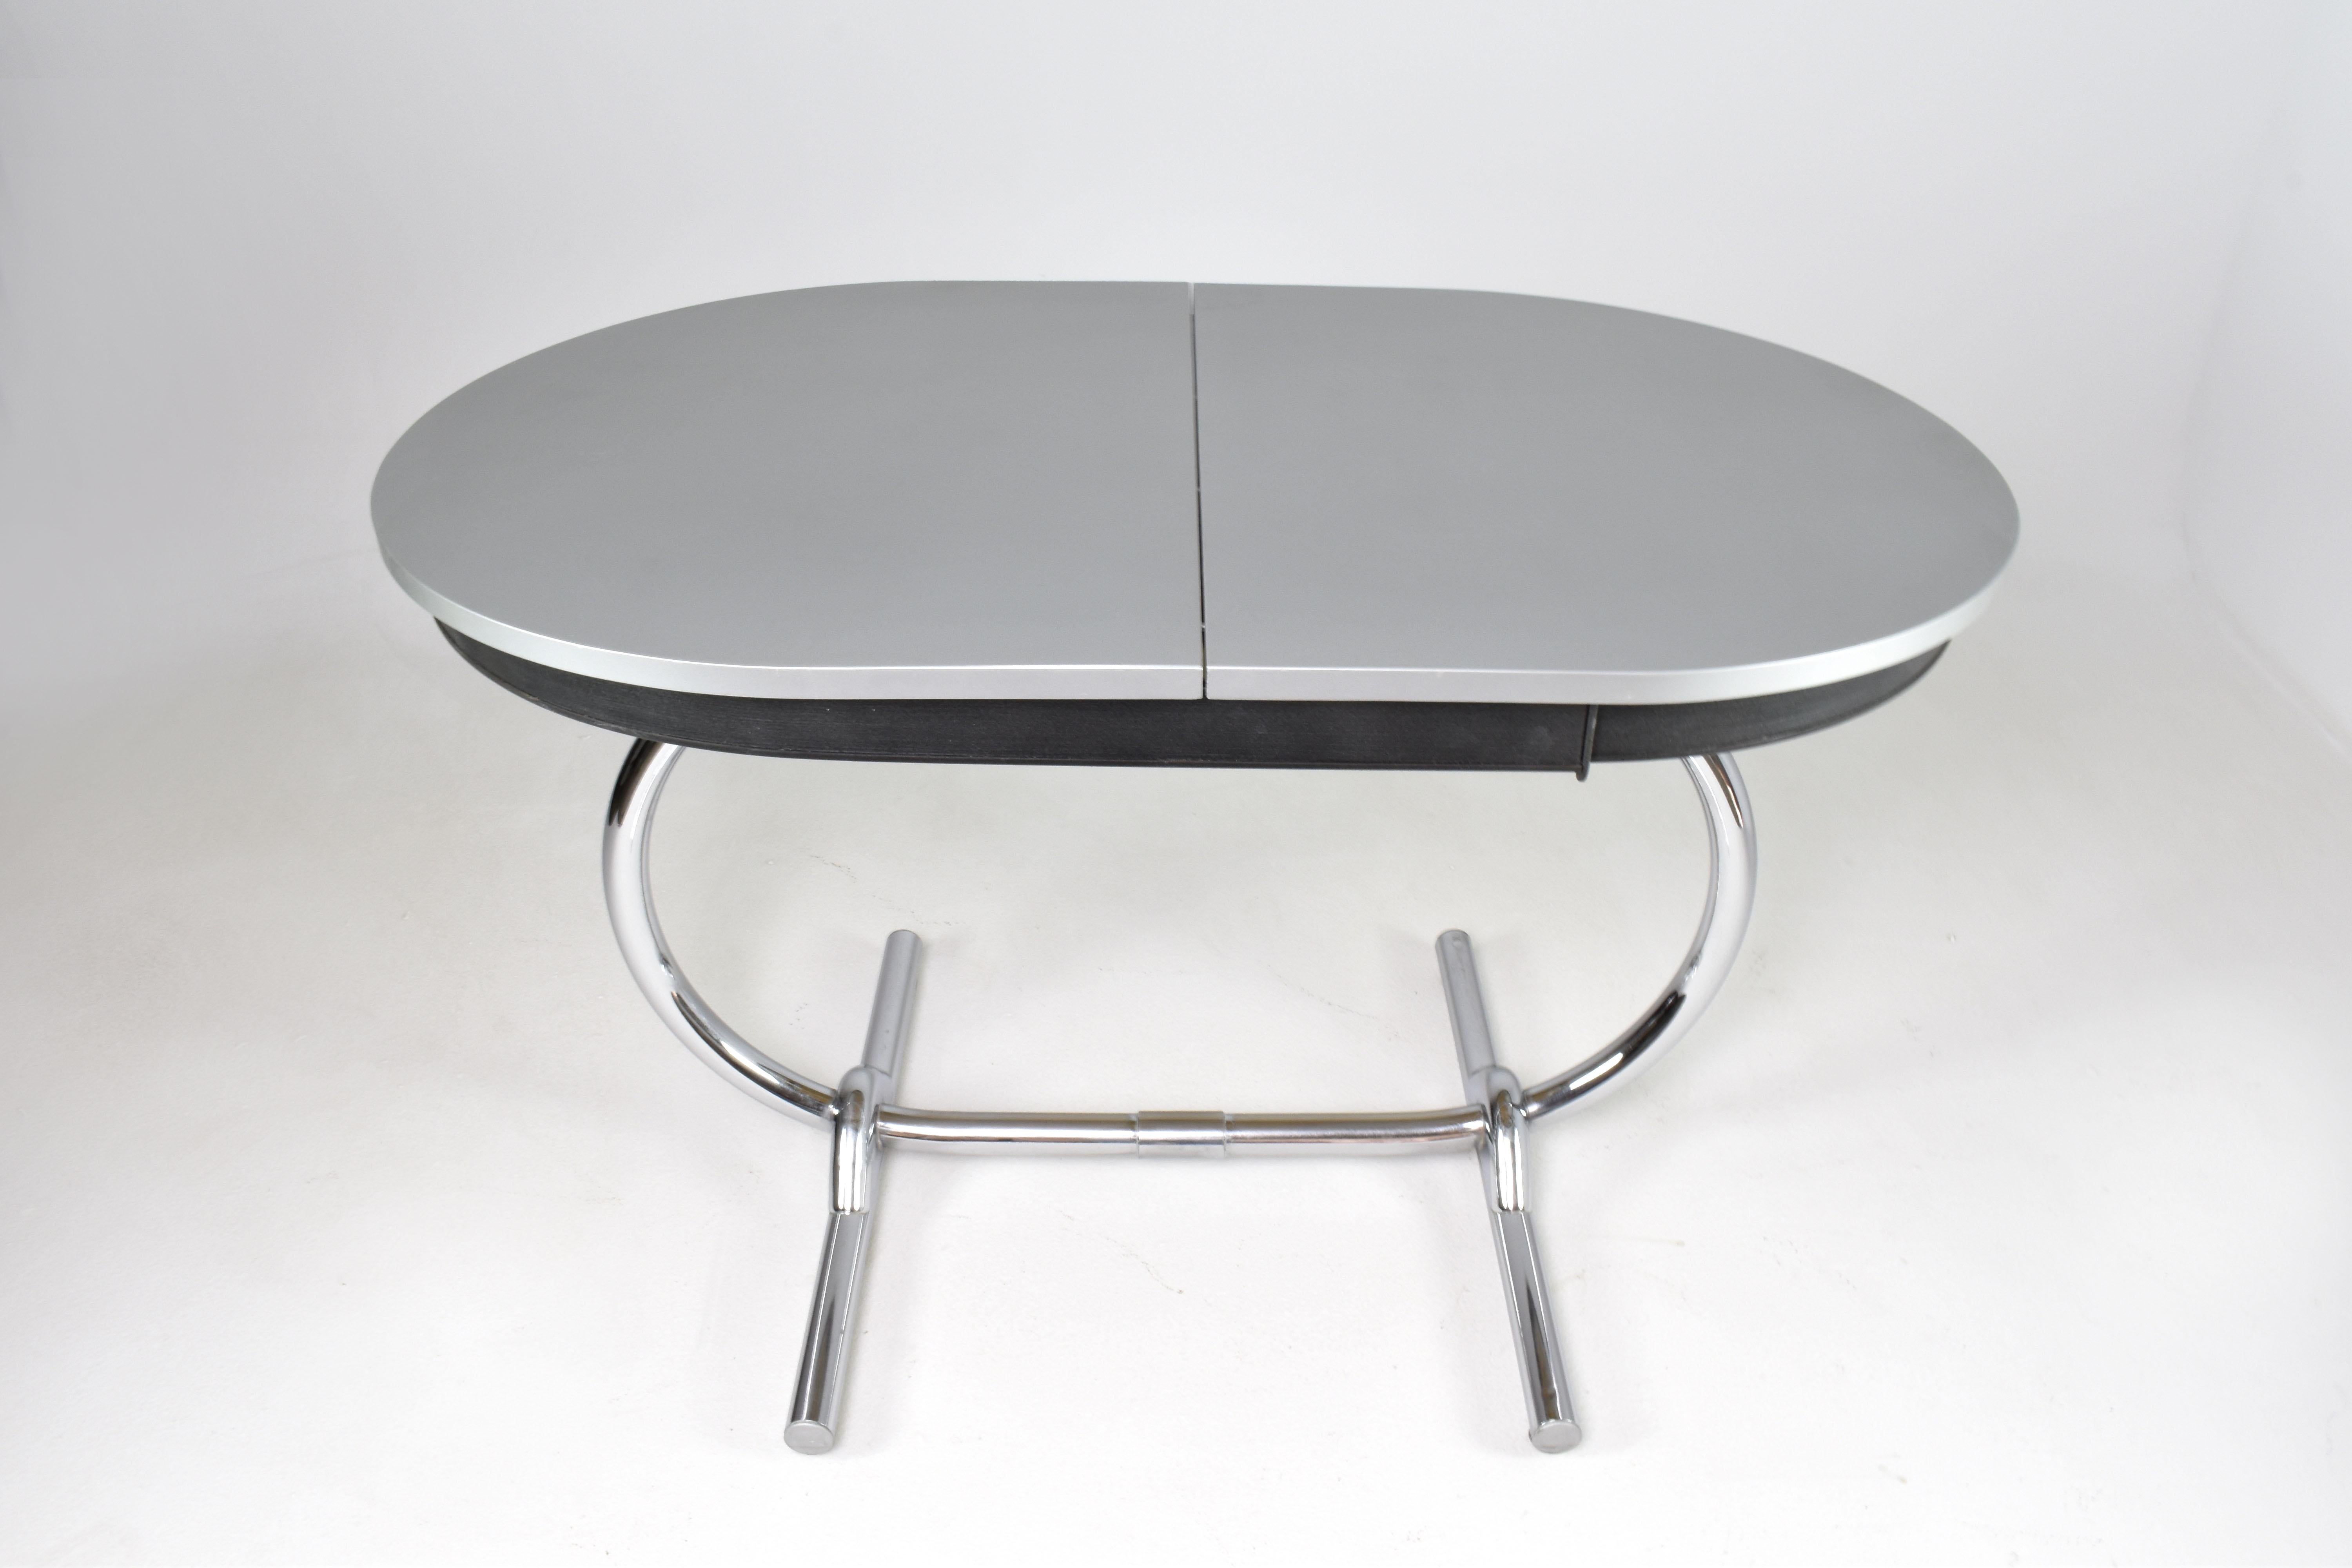 Very beautiful oval-shaped Formica table with extension leaves, featuring chrome metal legs, in good condition. The product is a rare find from the 1960s. 

Maximum Length: 161 cm (63.4 inches)
Minimum Length: 120 cm (47.2